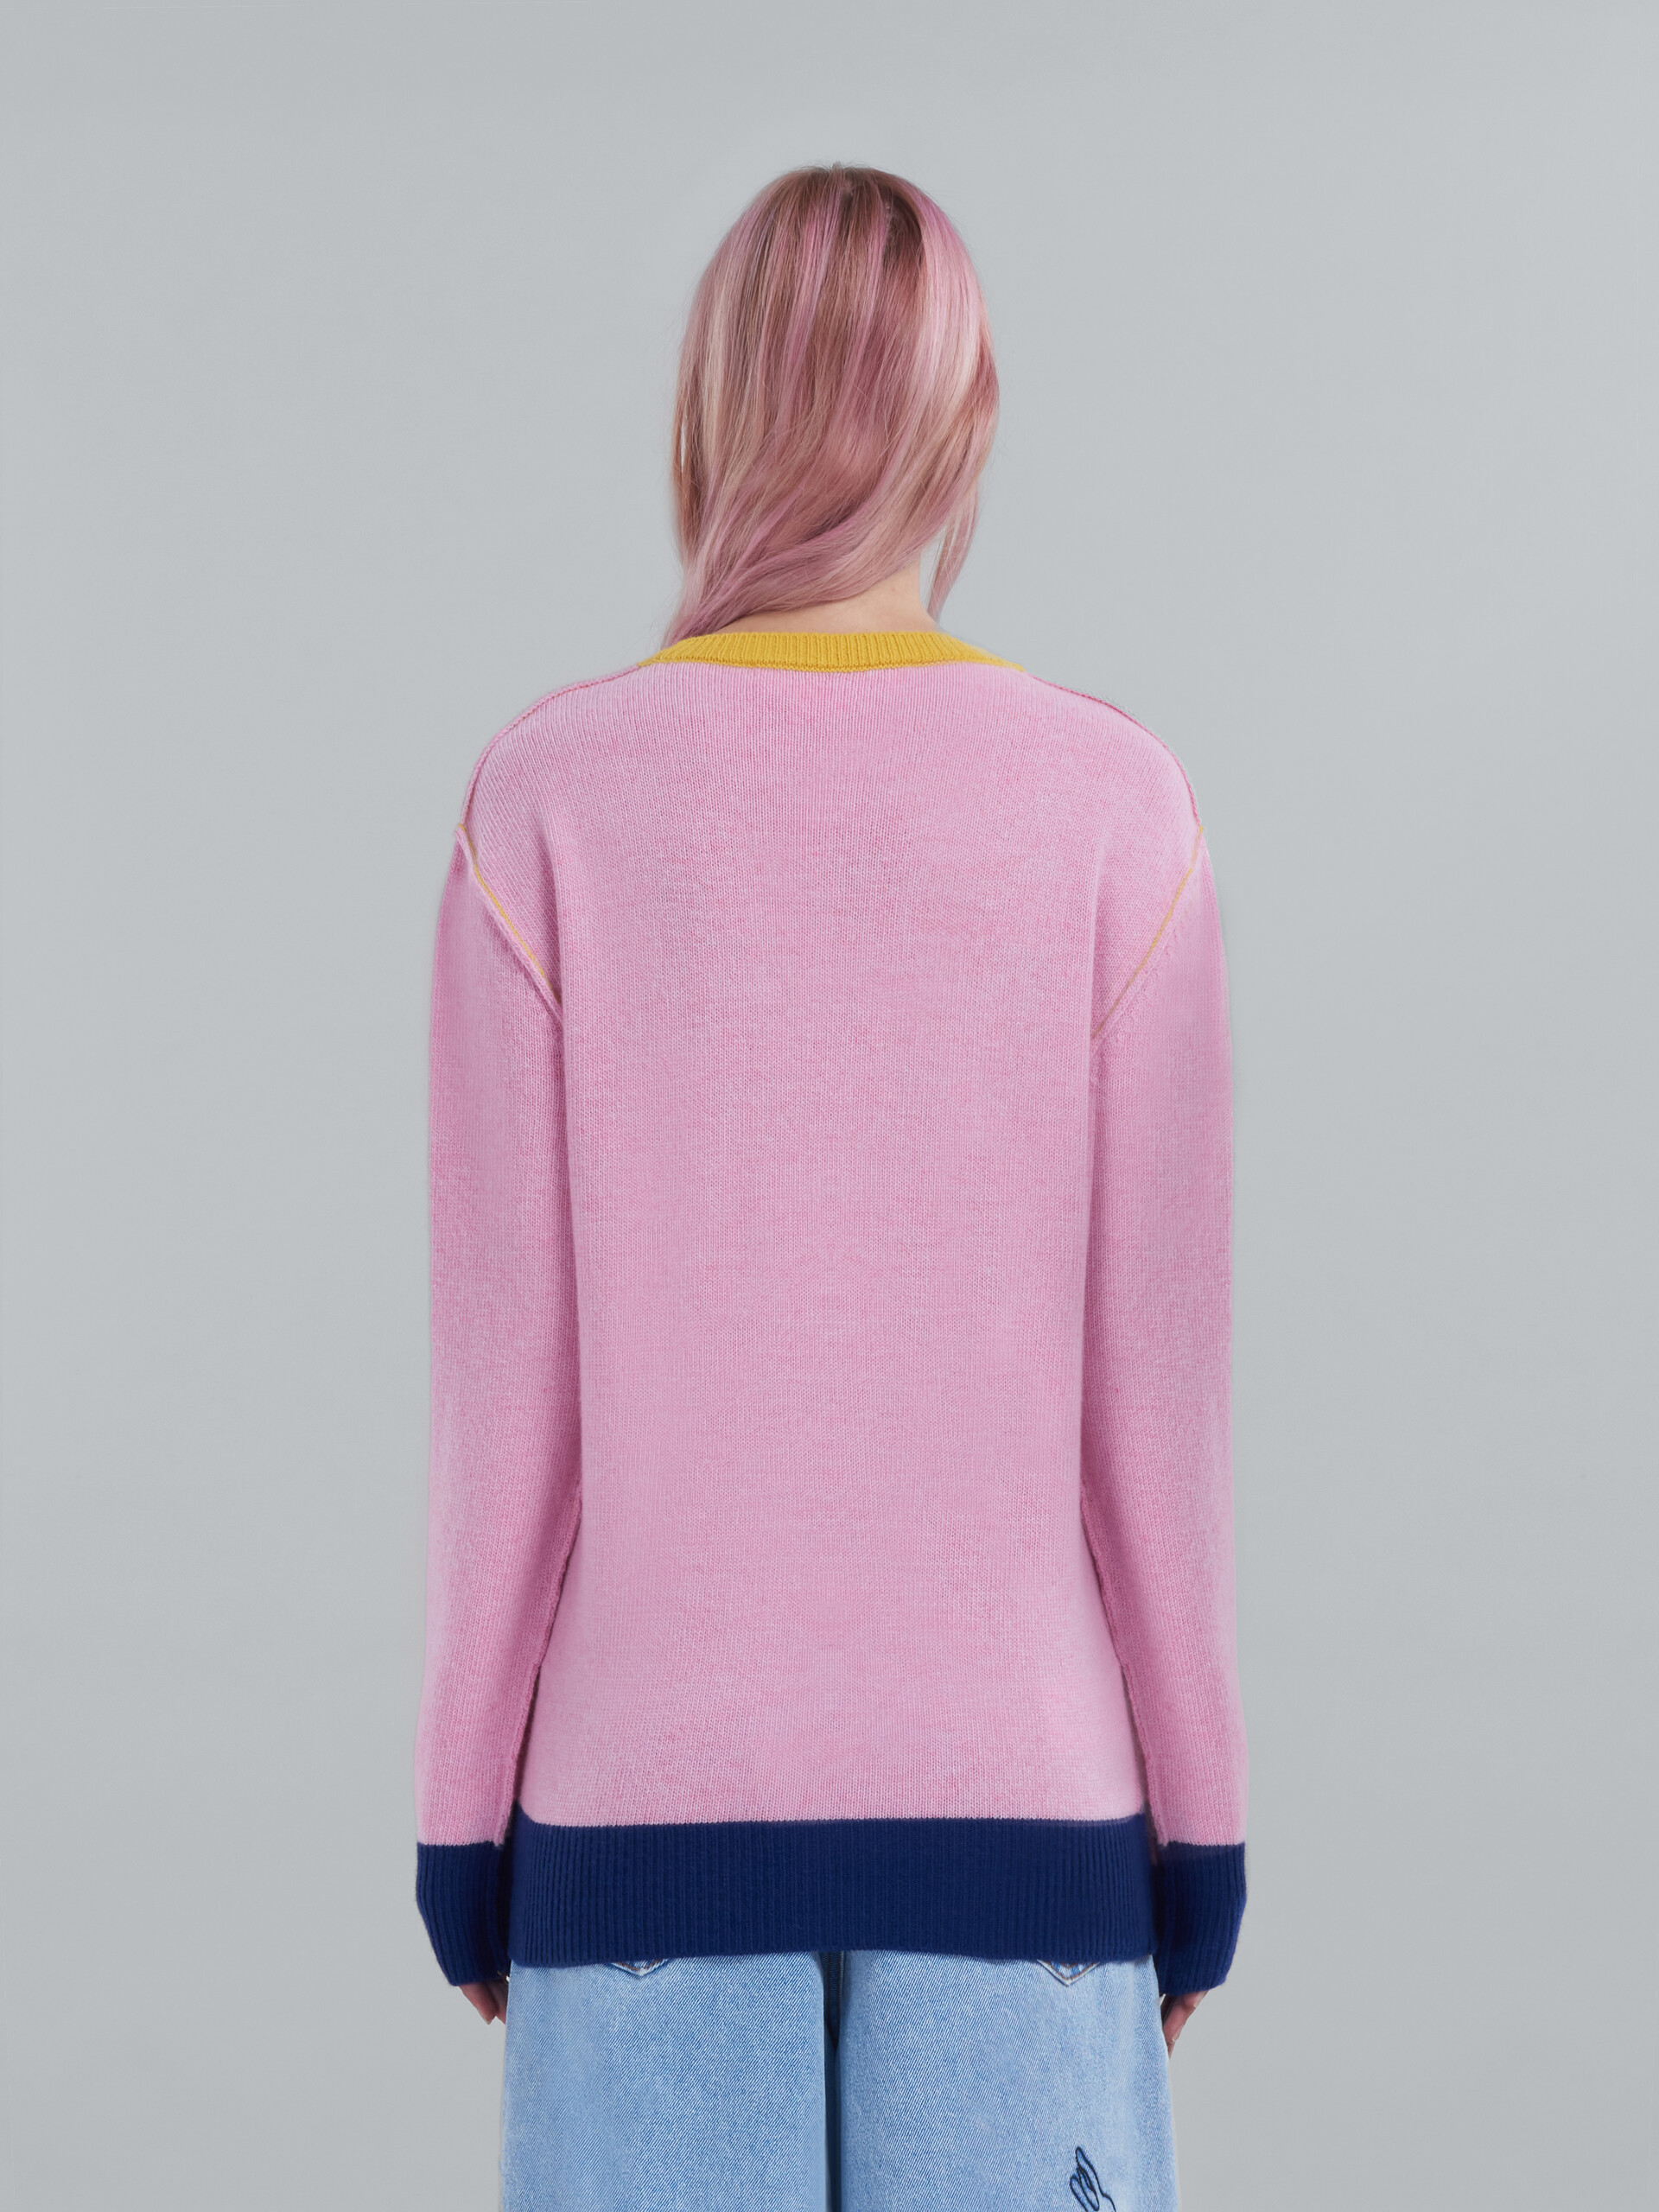 Pink wool sweater with logo - Pullovers - Image 3